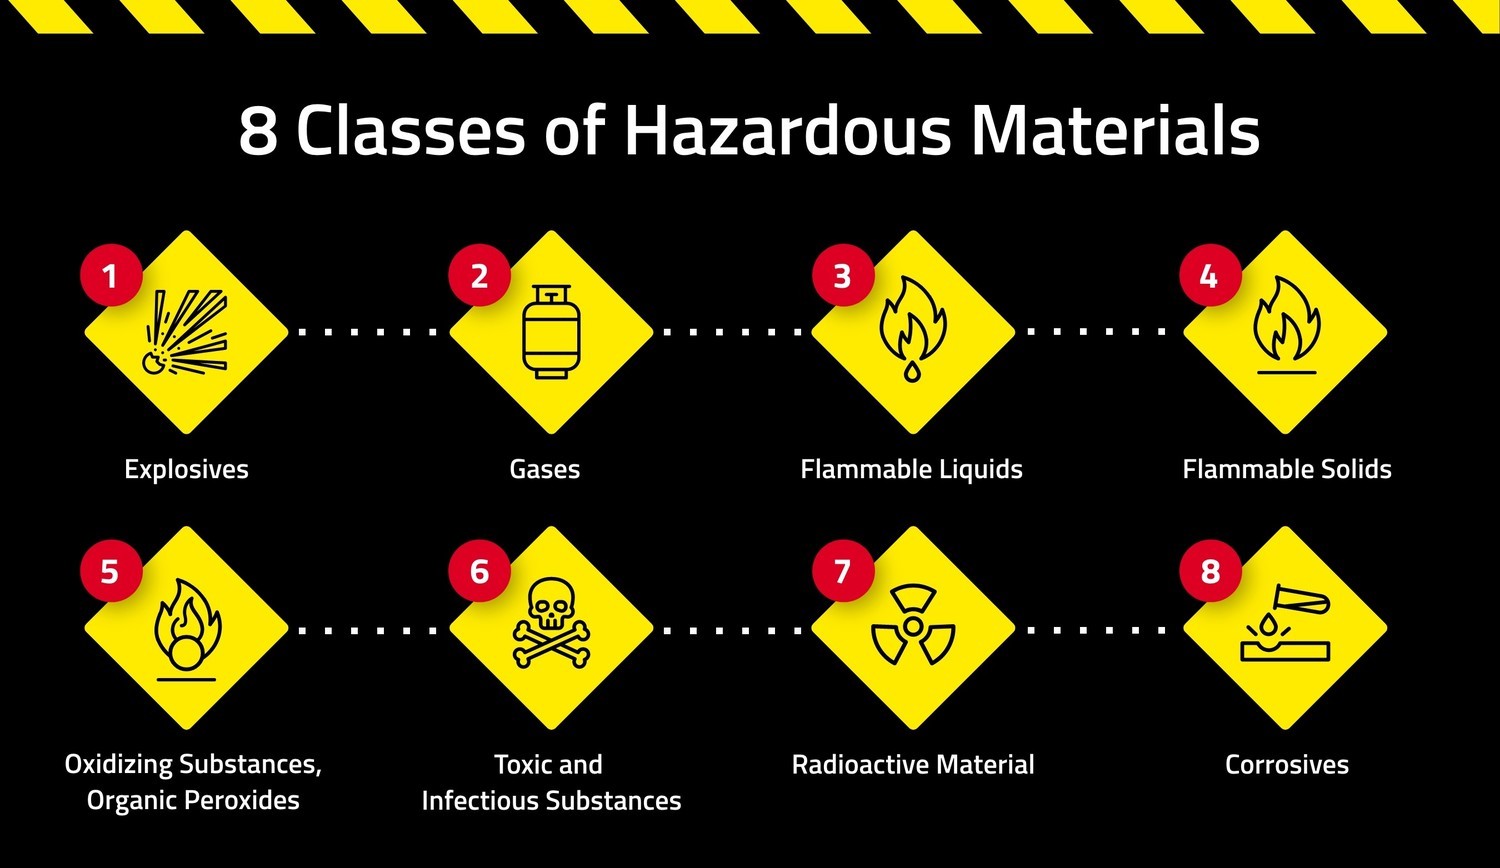 Ace the Test: Your Ultimate Guide to DMV Hazardous Materials Study